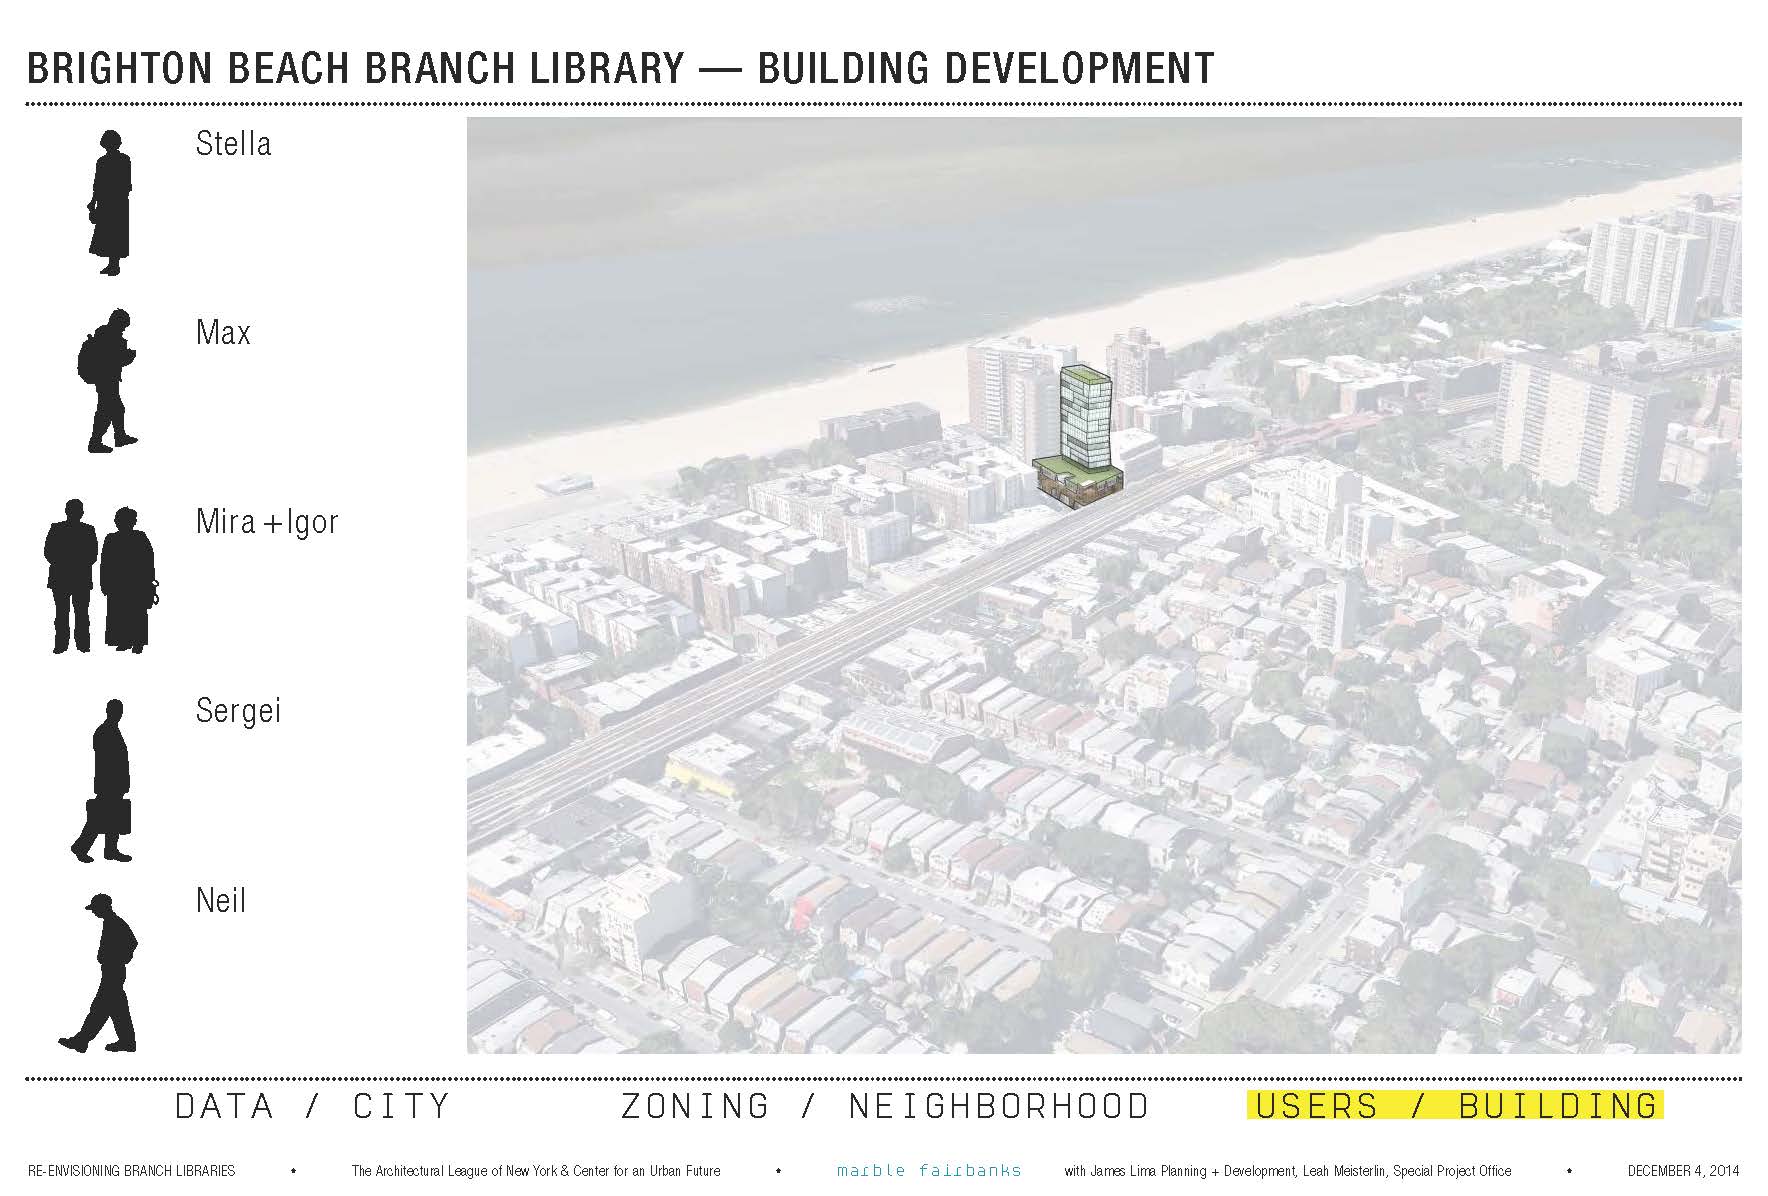 Marble Fairbanks_Re-Envisioning Branch Libraries_with citations small_Page_56.jpg